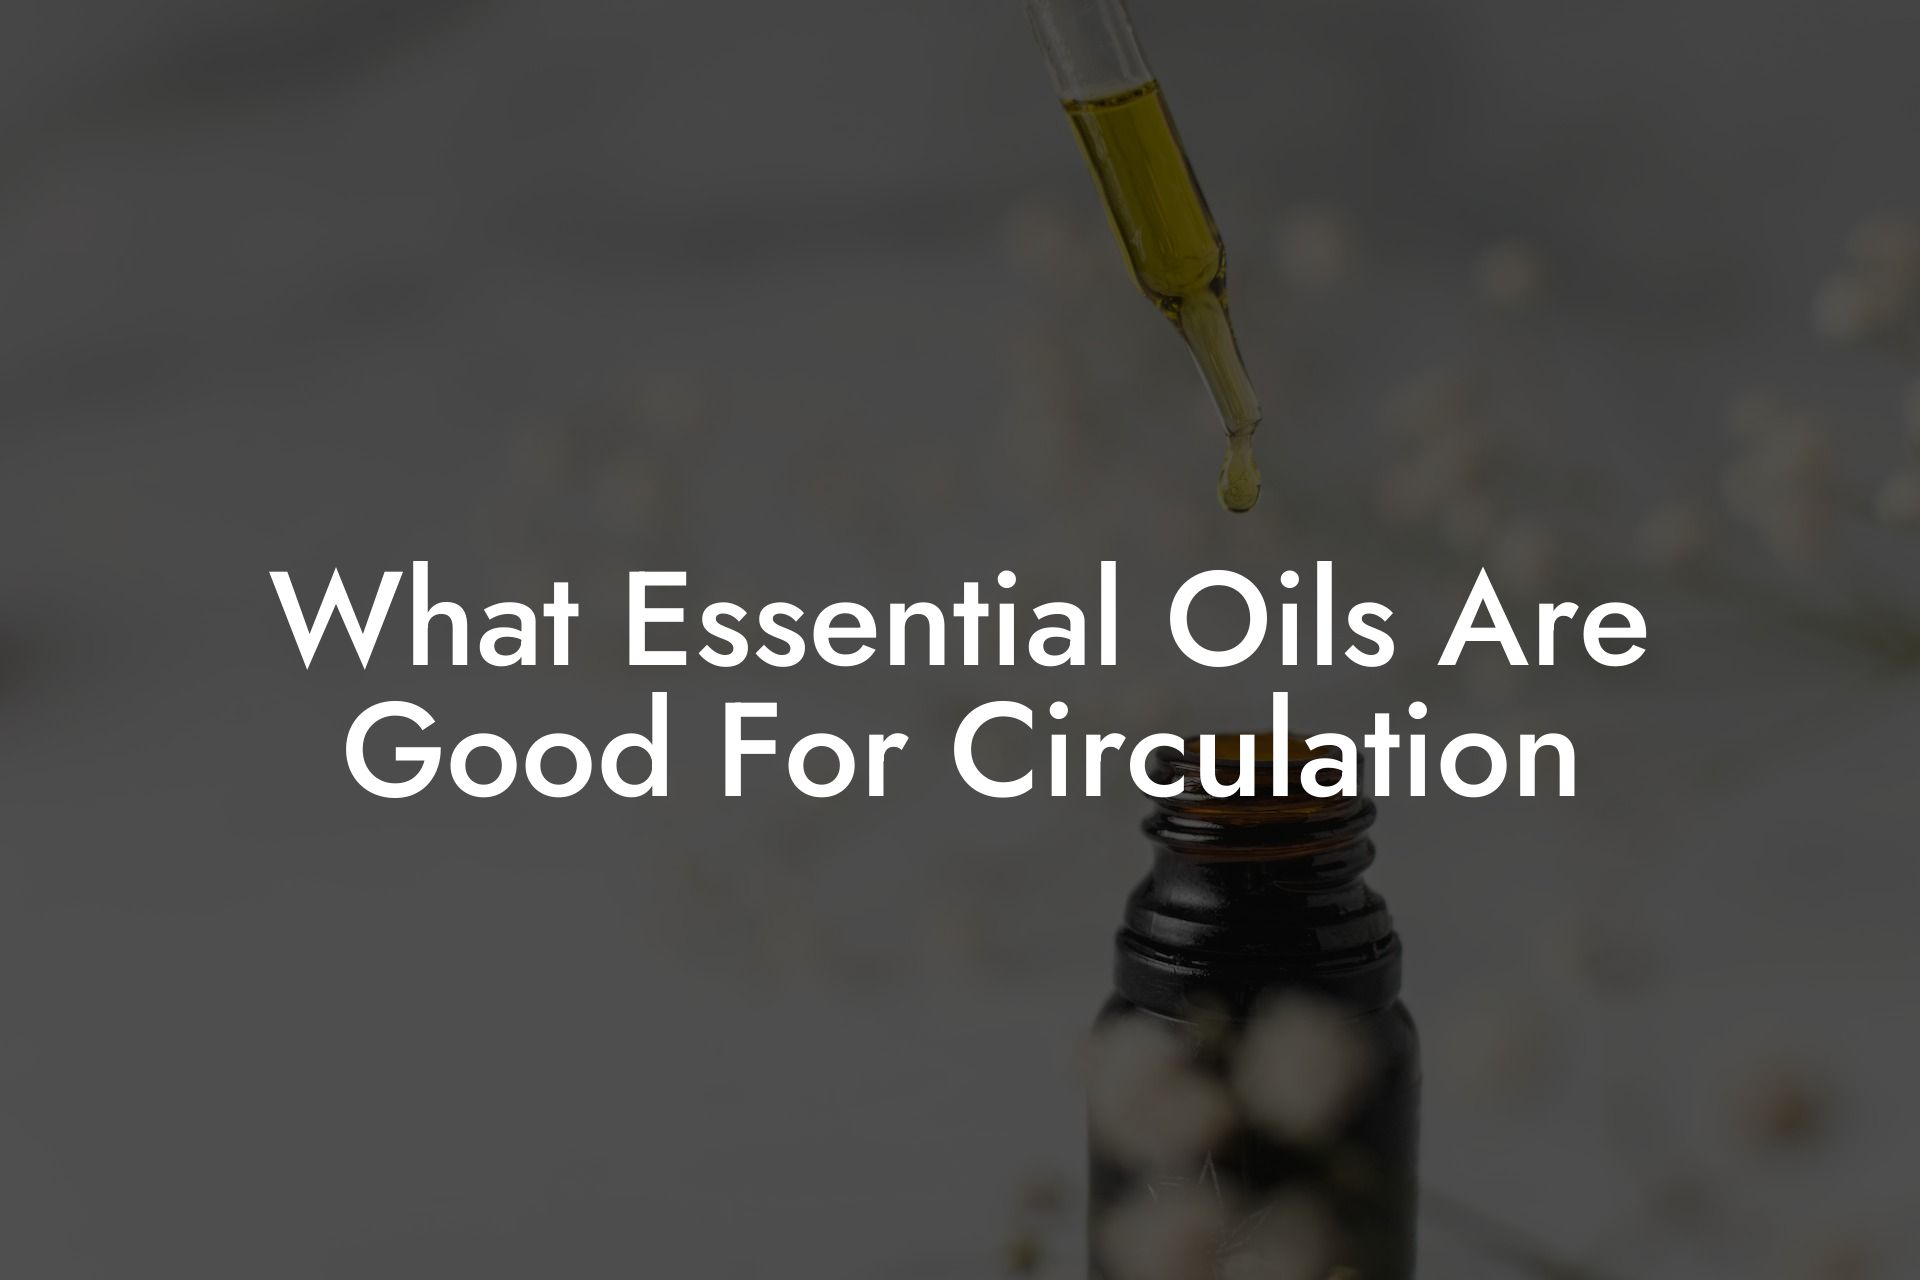 What Essential Oils Are Good For Circulation